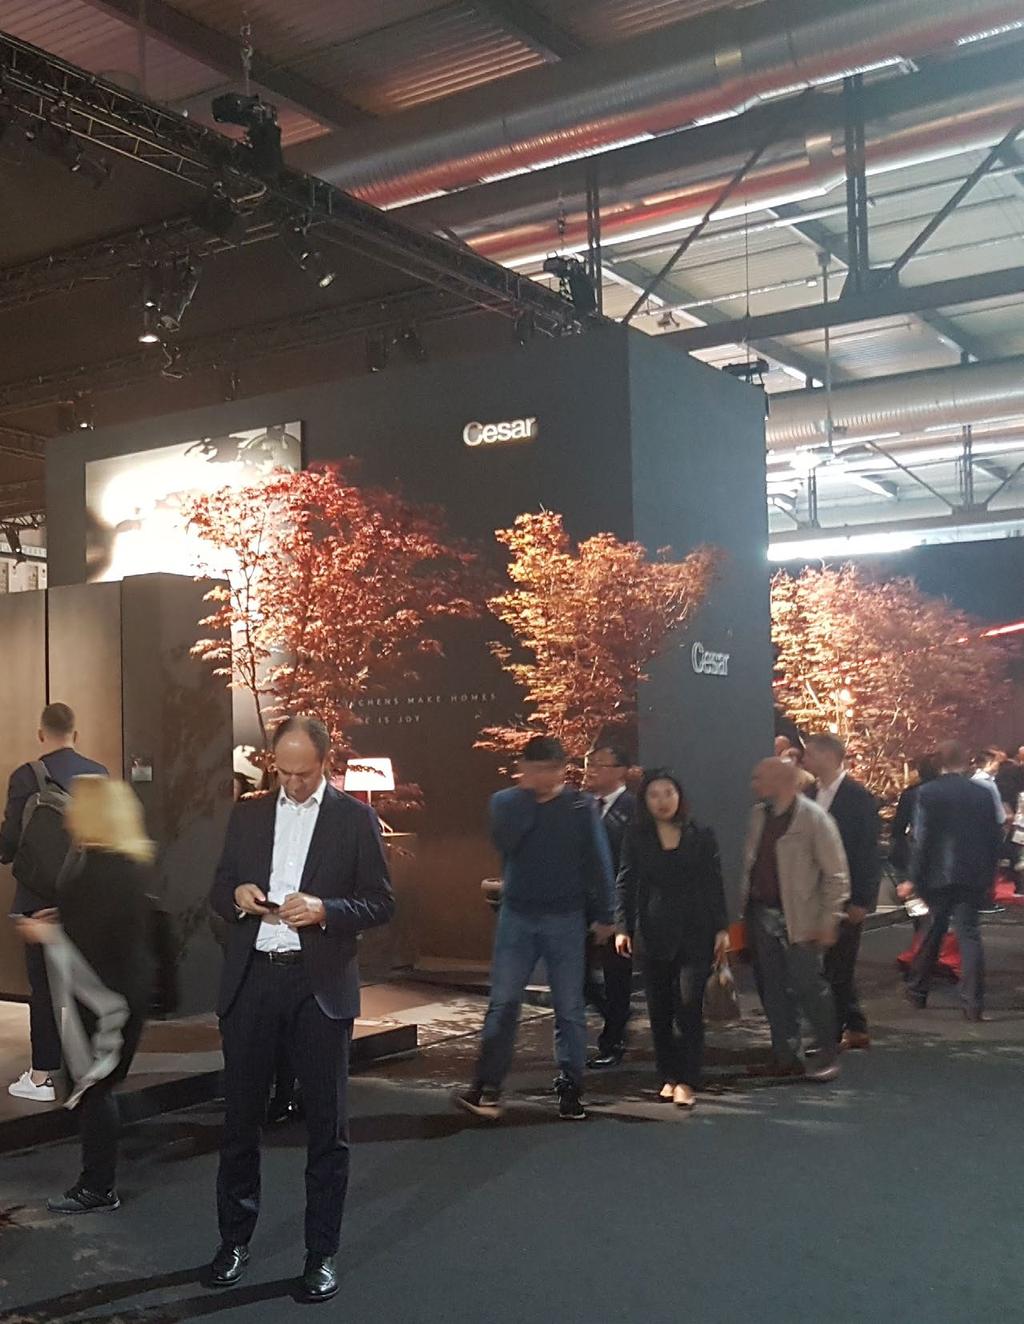 Walking the halls at Salone del Mobile Milano EuroCucina/FTK brings the best of contemporary